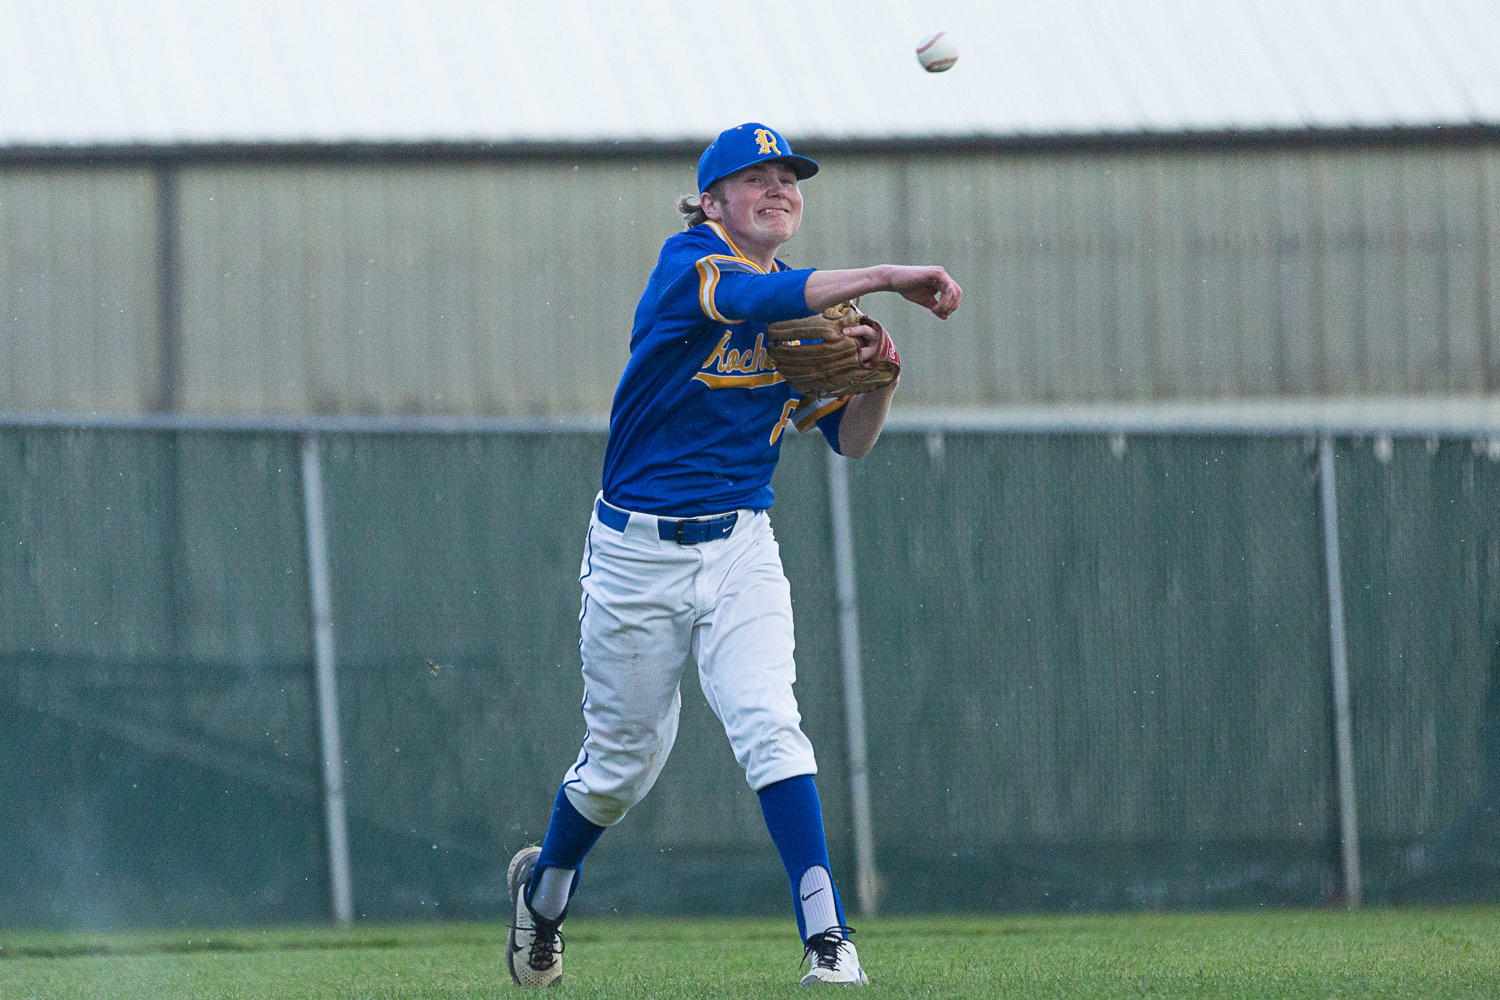 Hyde Parrish throws to first during Rochester's 4-1 loss at W.F. West on March 22.